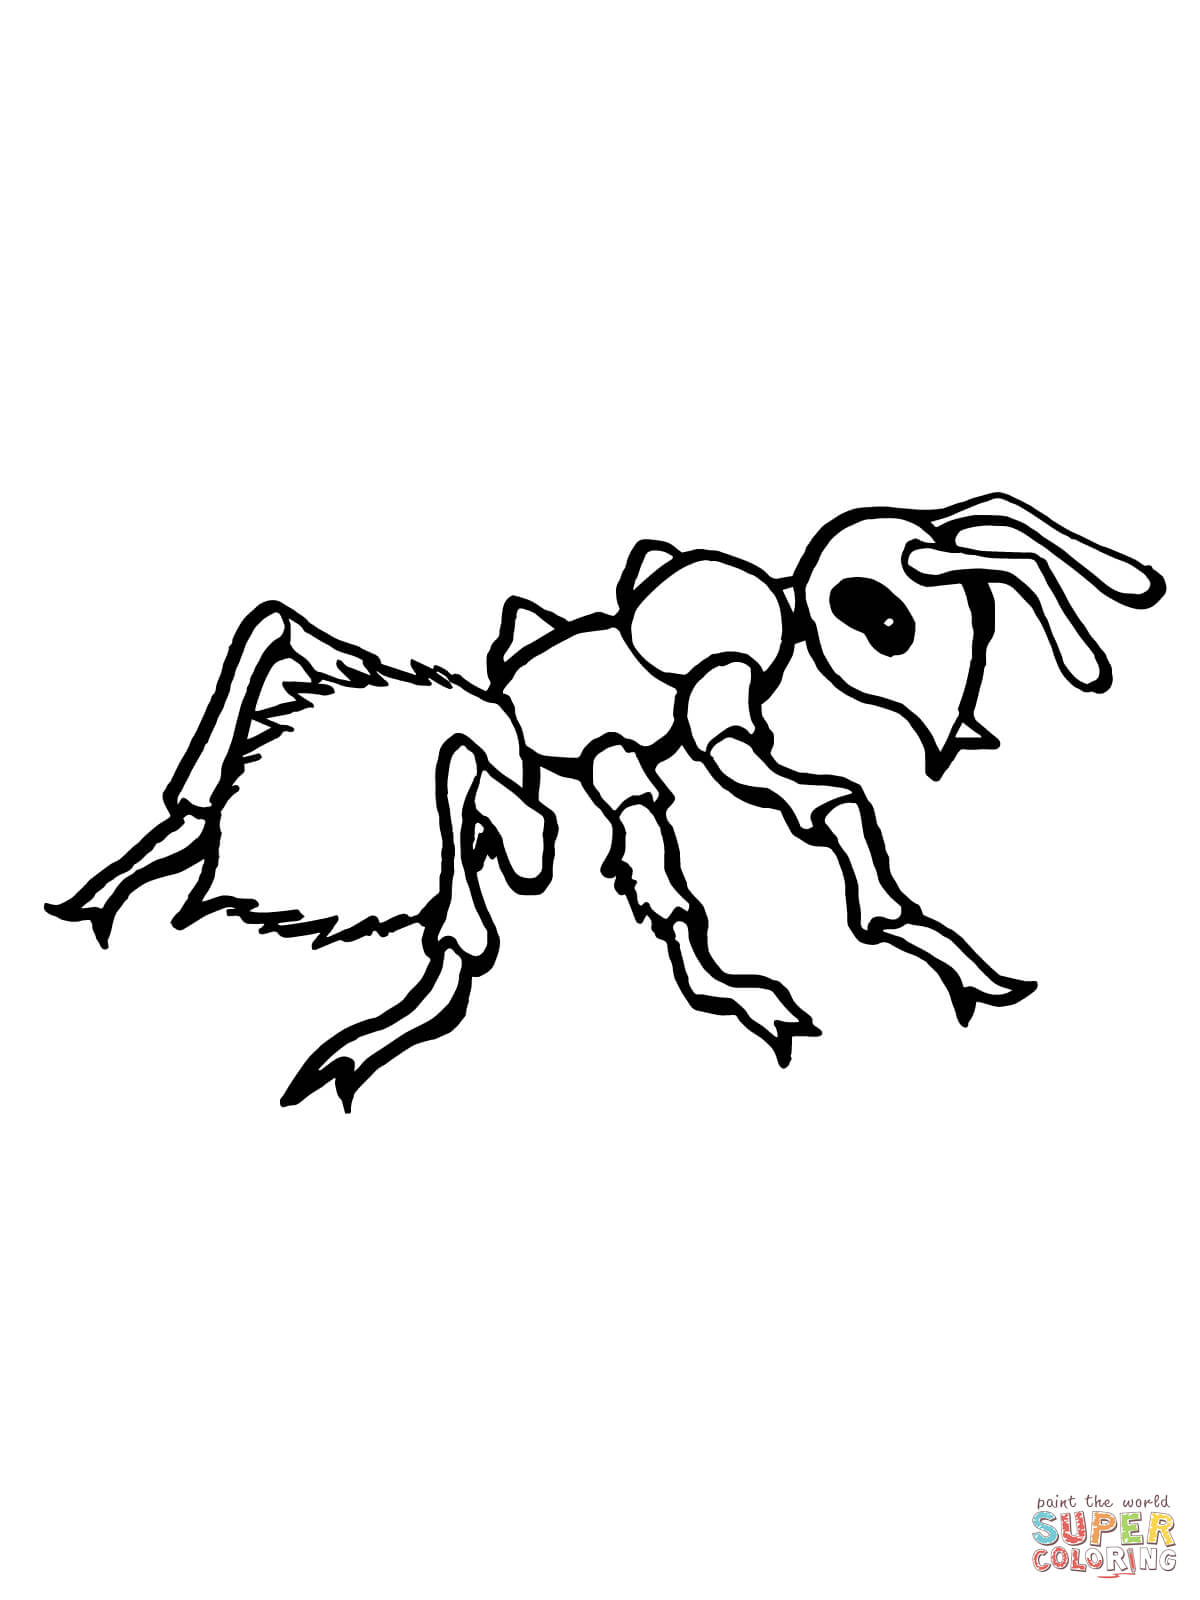 Realistic ant coloring free. Ants clipart colouring page